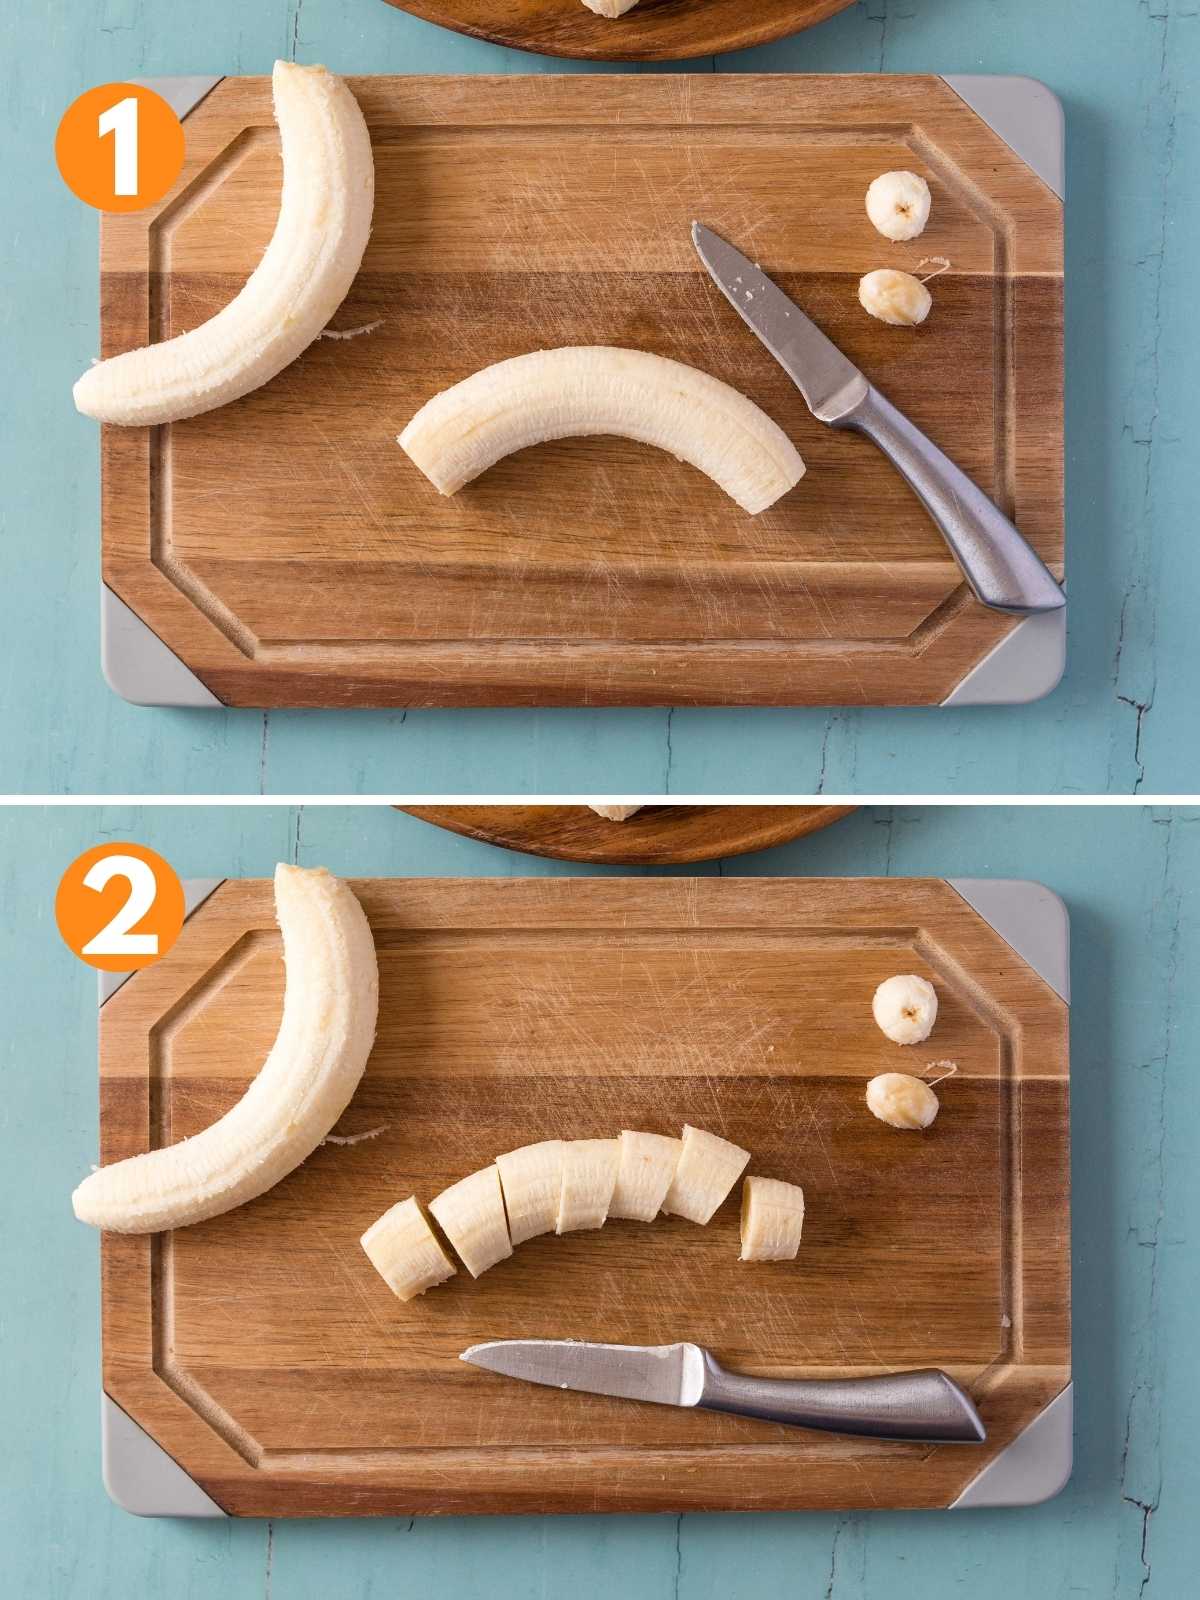 Collage showing the two steps to cut the bananas.